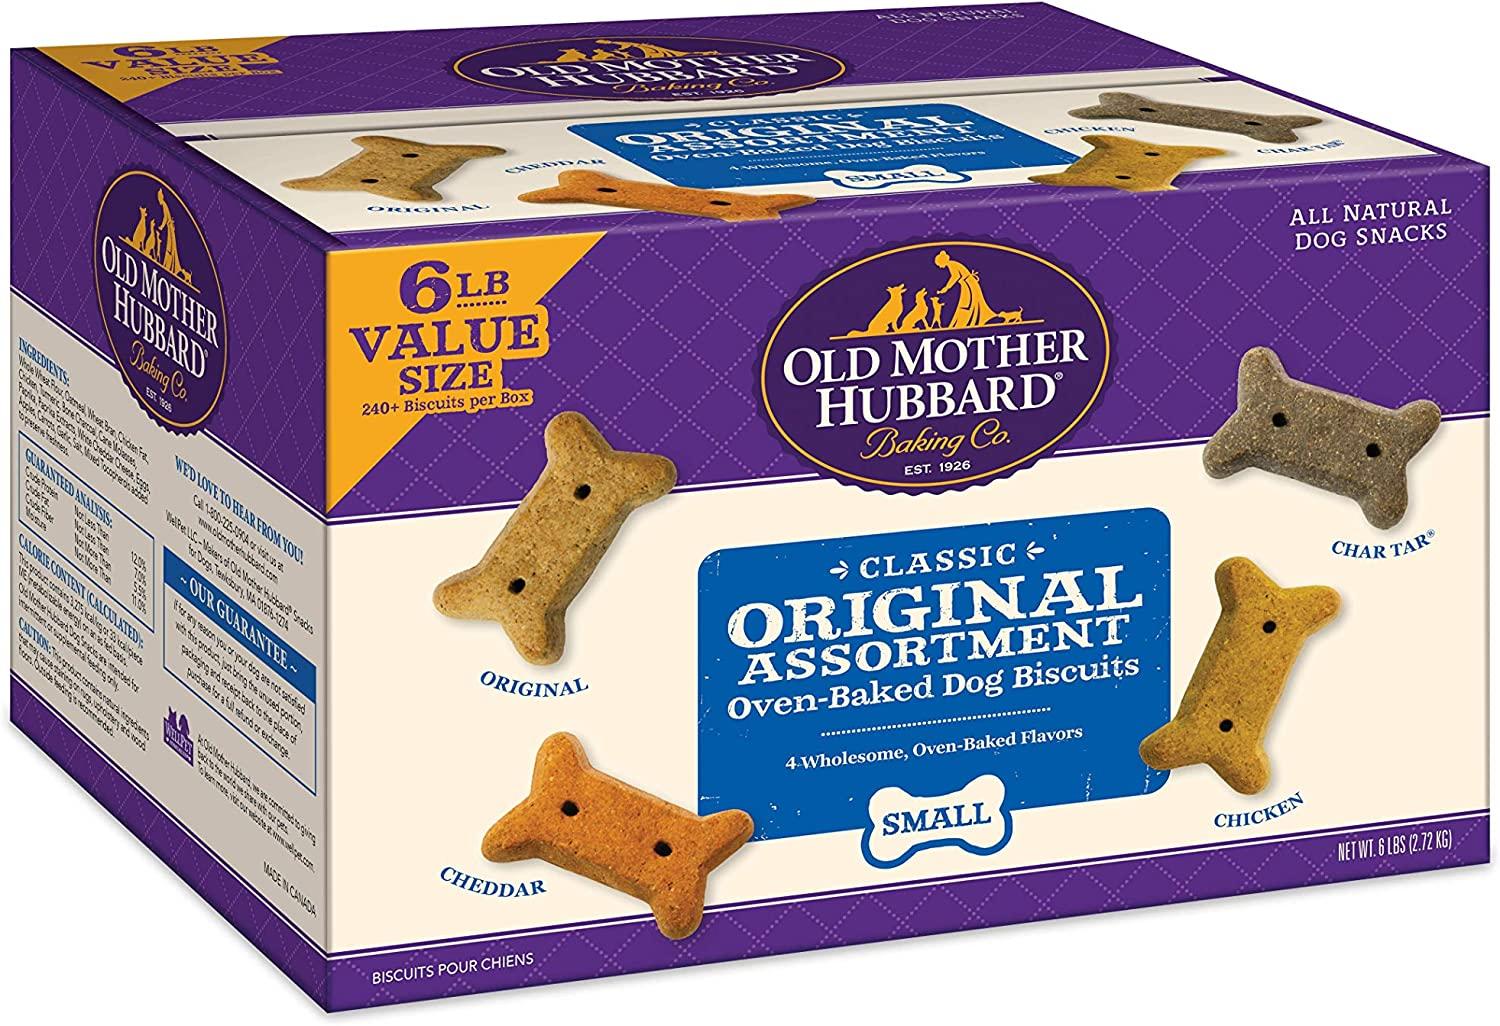 6-Lb Old Mother Hubbard Classic Crunchy Dog Treats for $8.18 Shipped